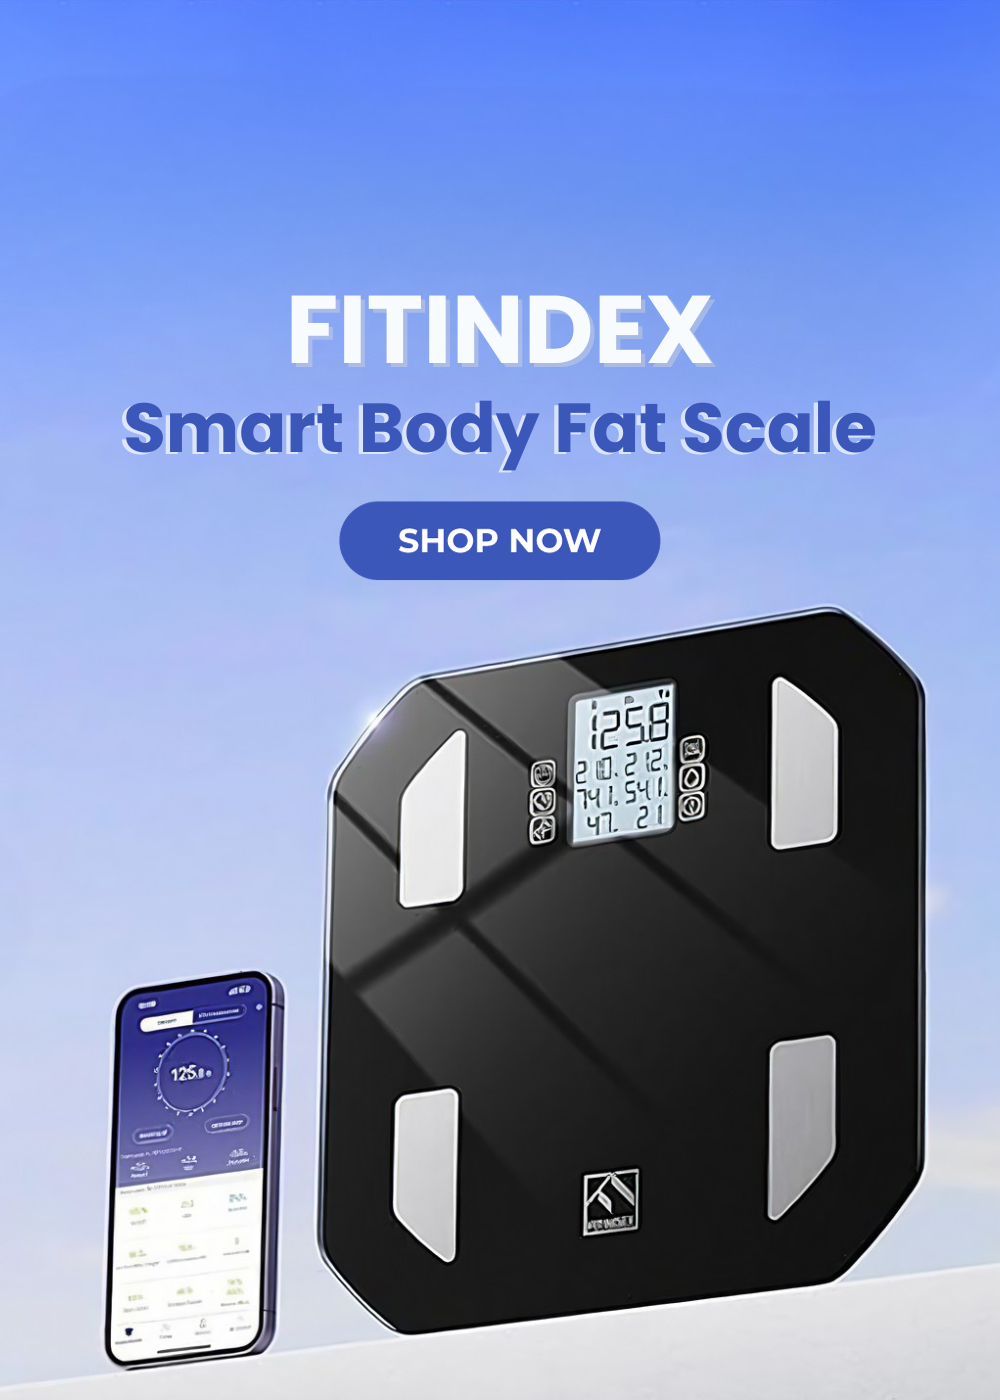 Smart Body Fat Scale Is Your Great Health Personal Trainer to